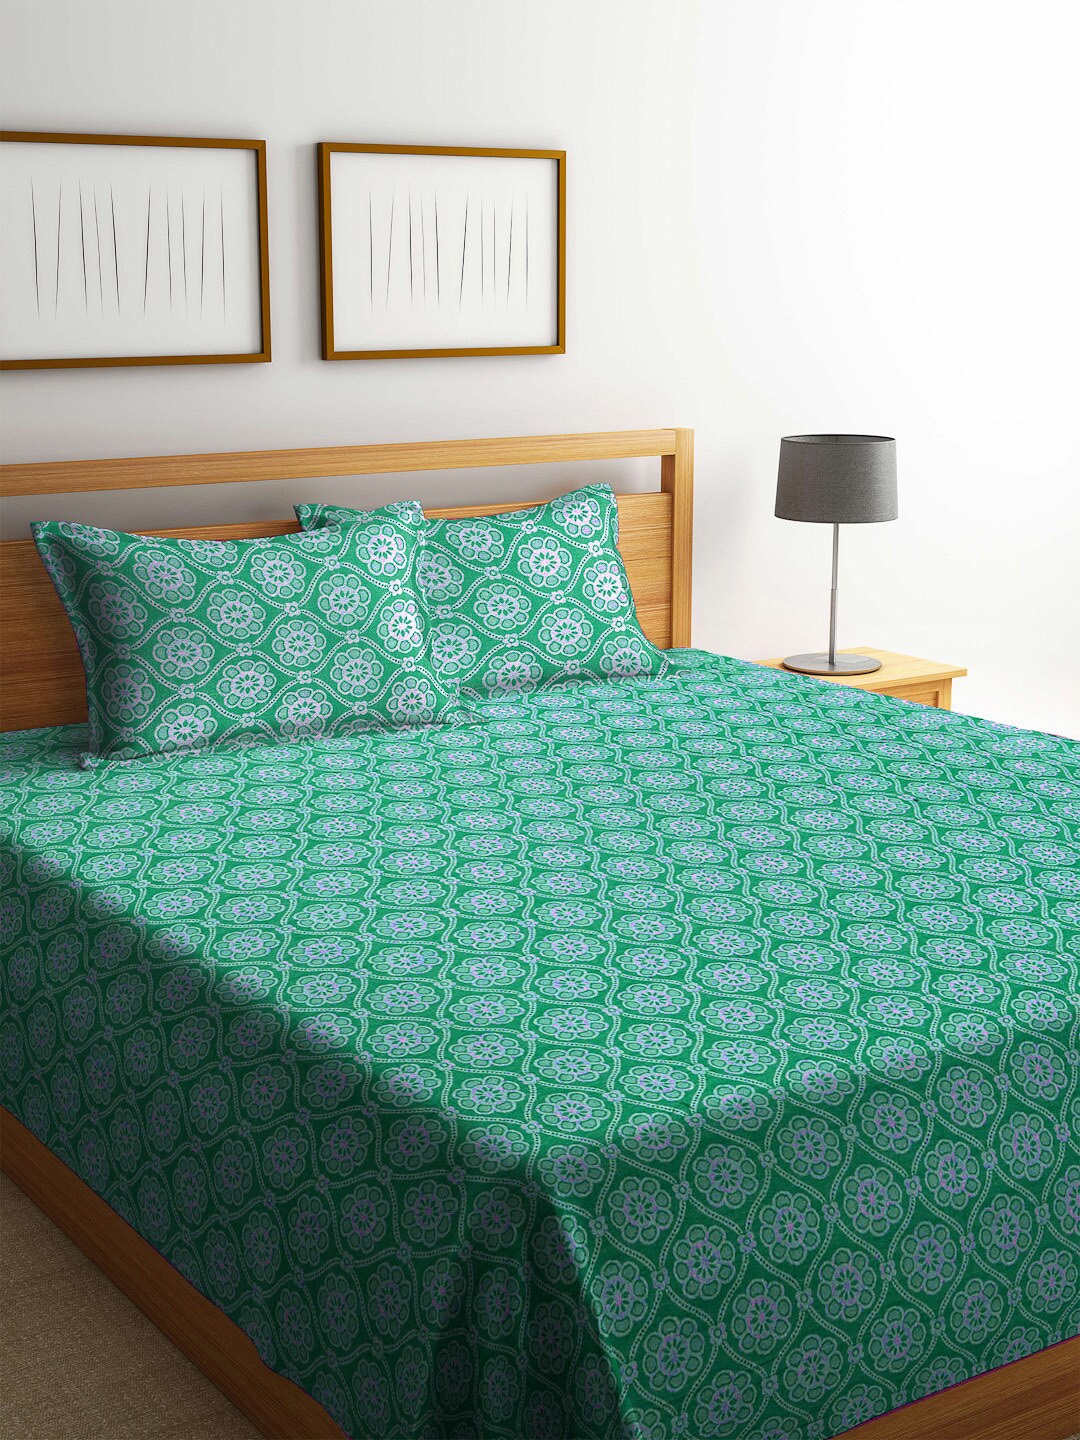 KLOTTHE Green & White Woven Design Cotton 1 Double King Bedcover With 2 Pillow Covers Price in India